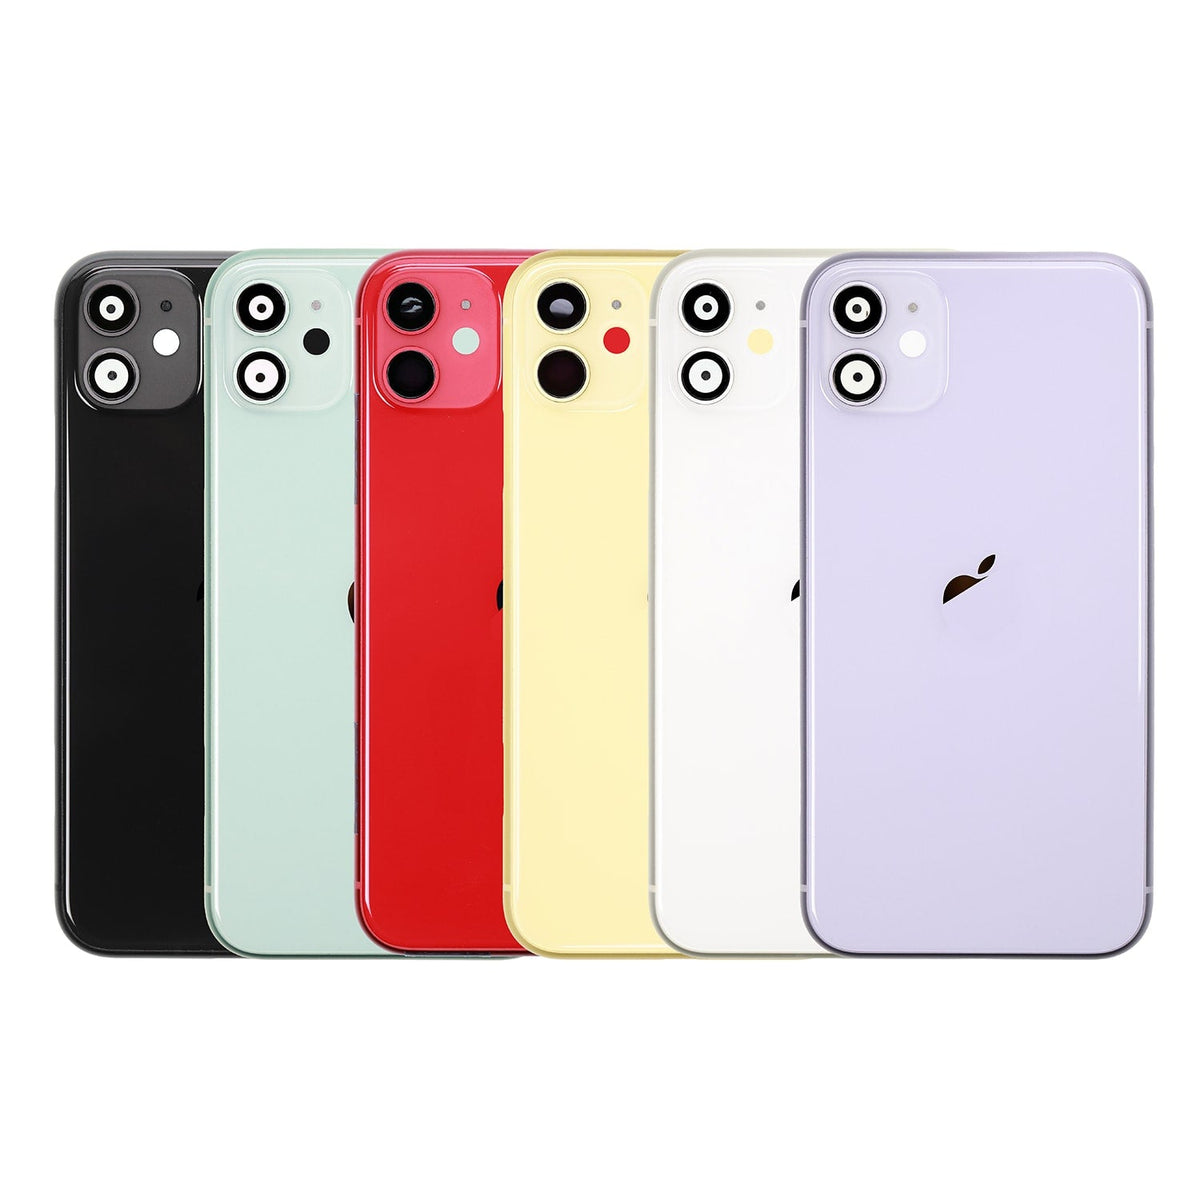 ORIGINAL REAR HOUSING WITH FRAME FOR IPHONE 11